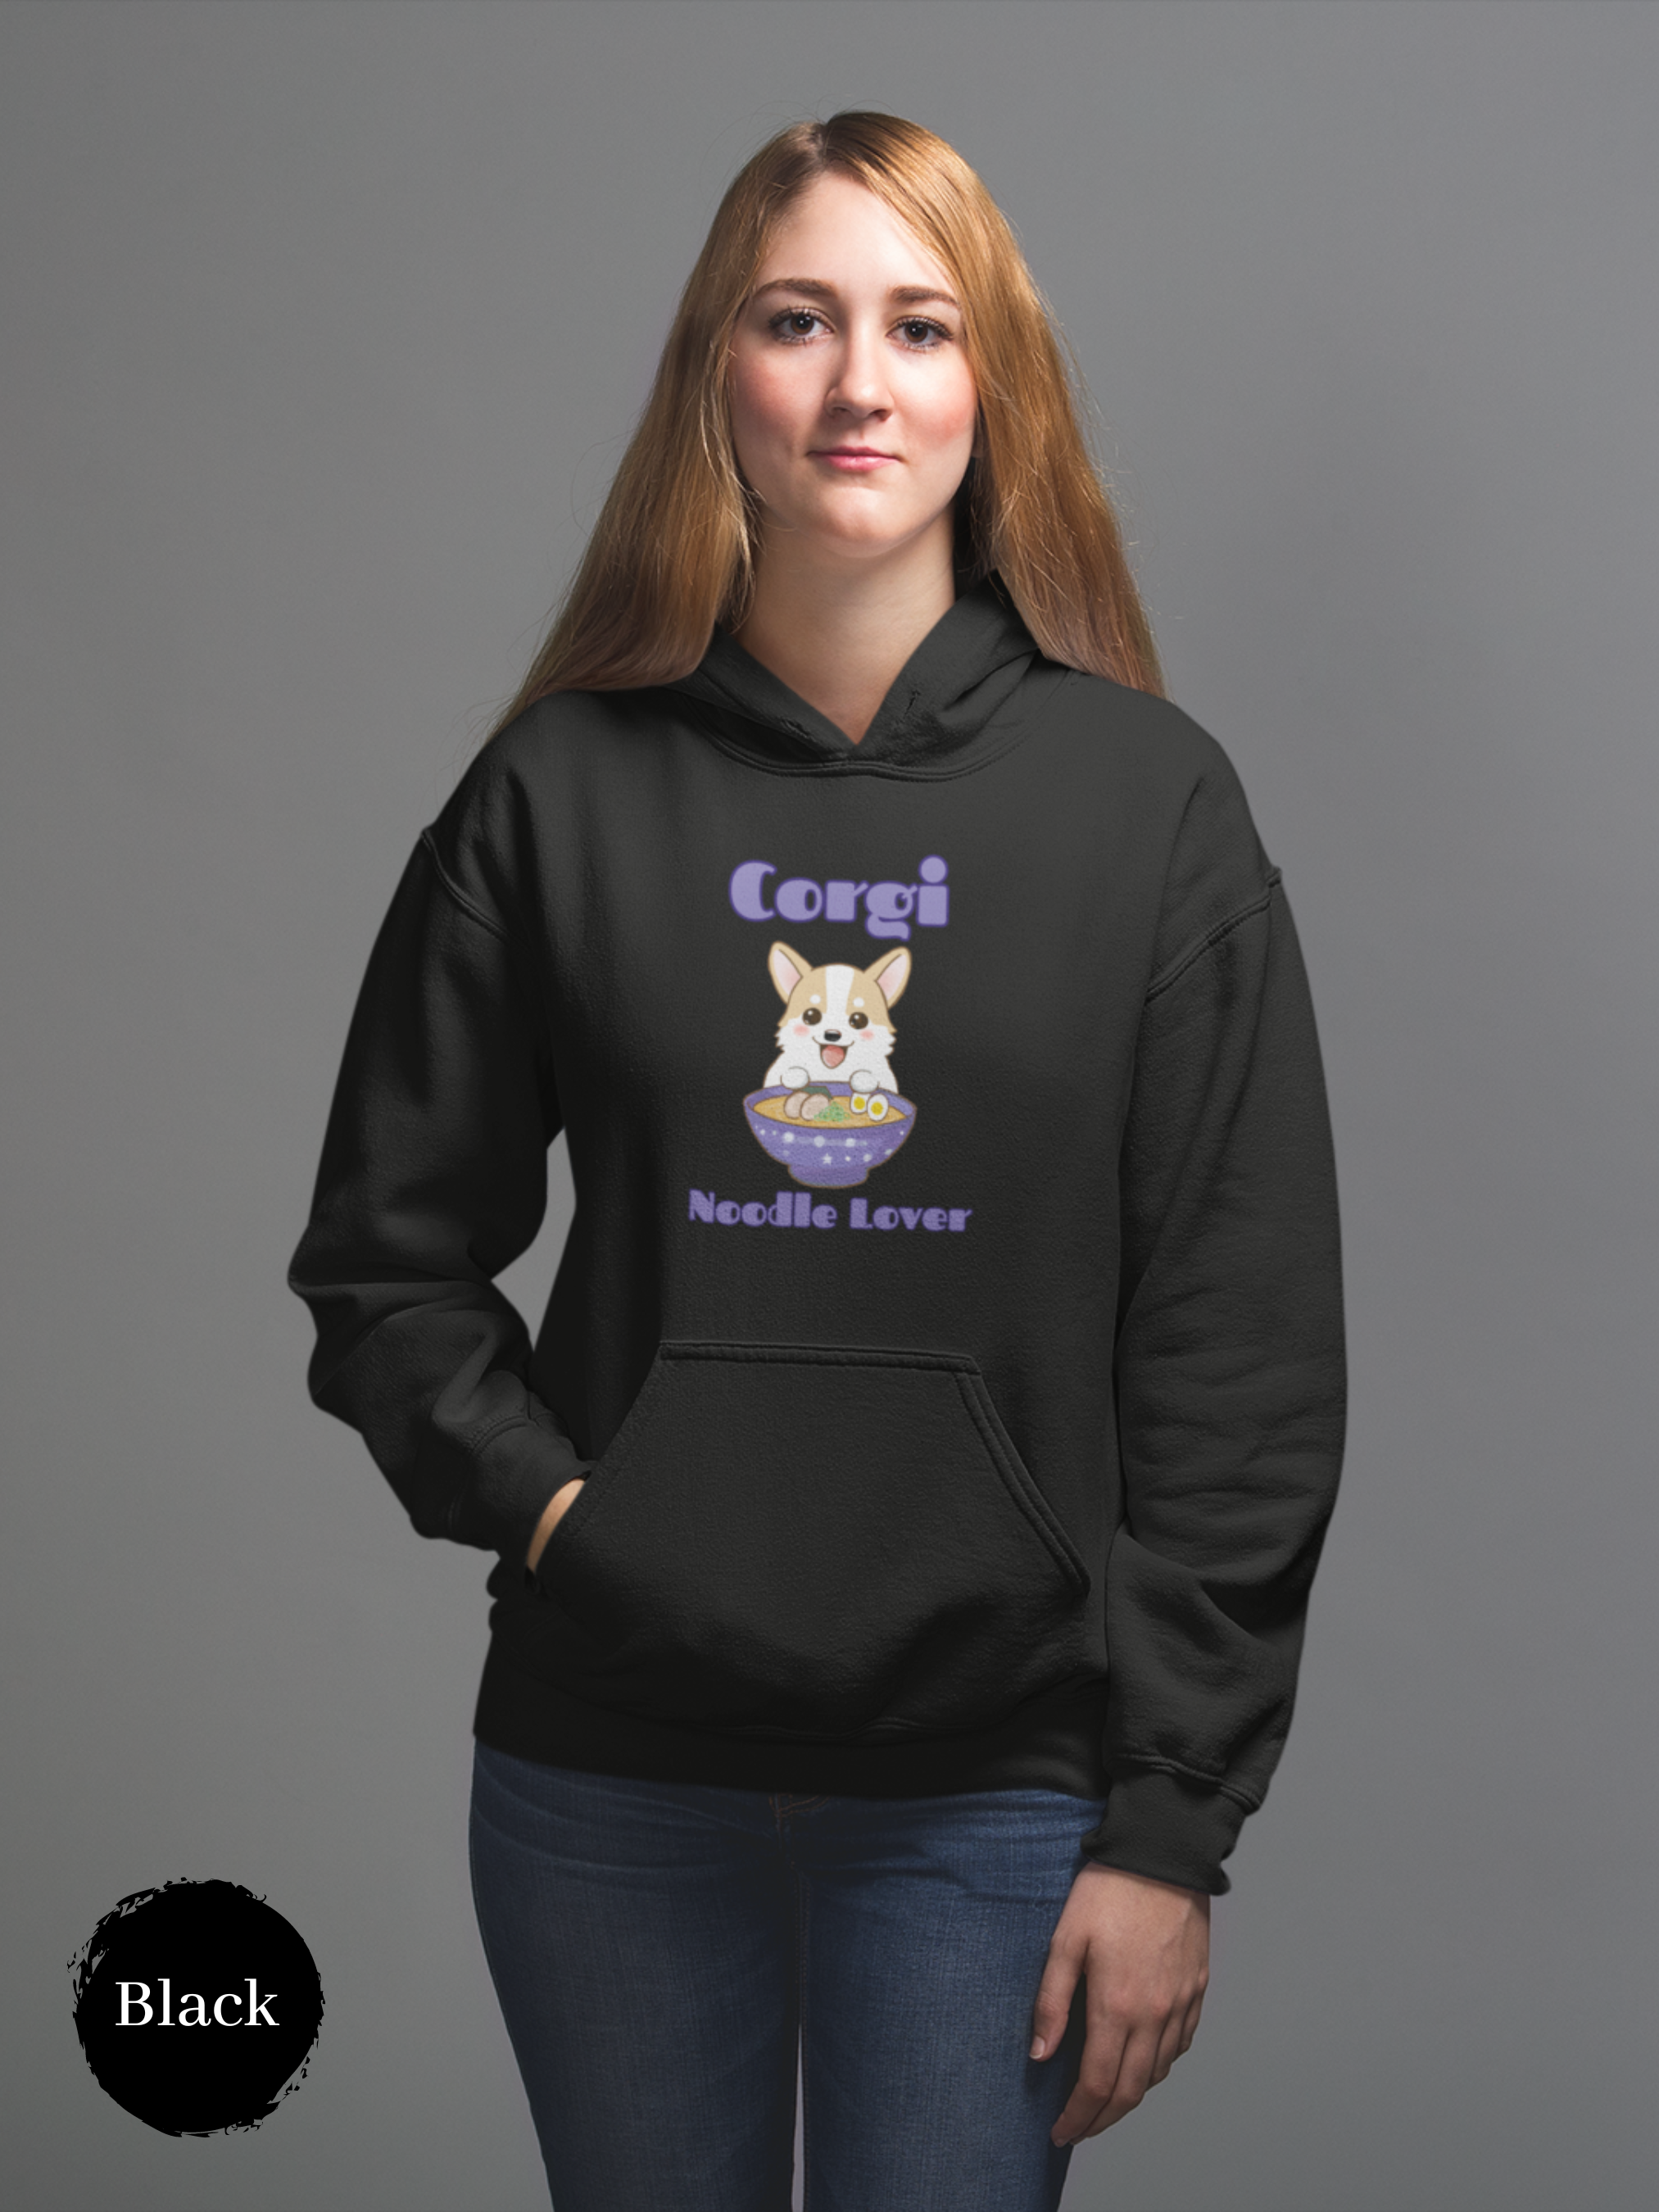 Ramen Hoodie: Corgi Noodle Lover with Ramen Art and Asian Food Vibes, Perfect for Foodie Hoodies and Pun Hoodies Fans